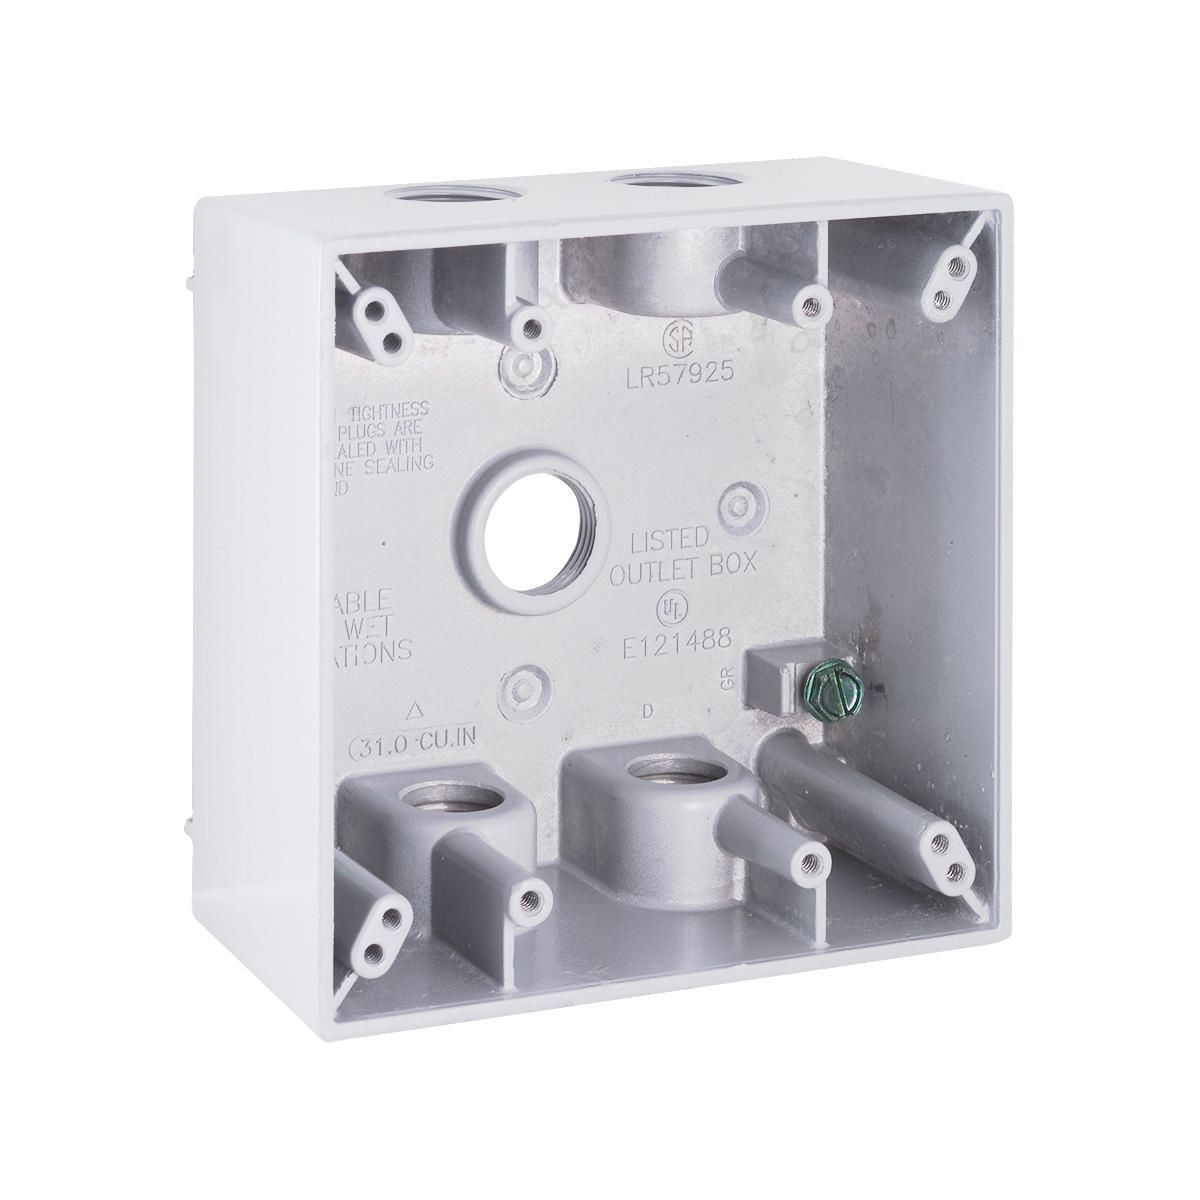 2G WP BOX (5) 1/2 IN. OUTLETS - WHITE